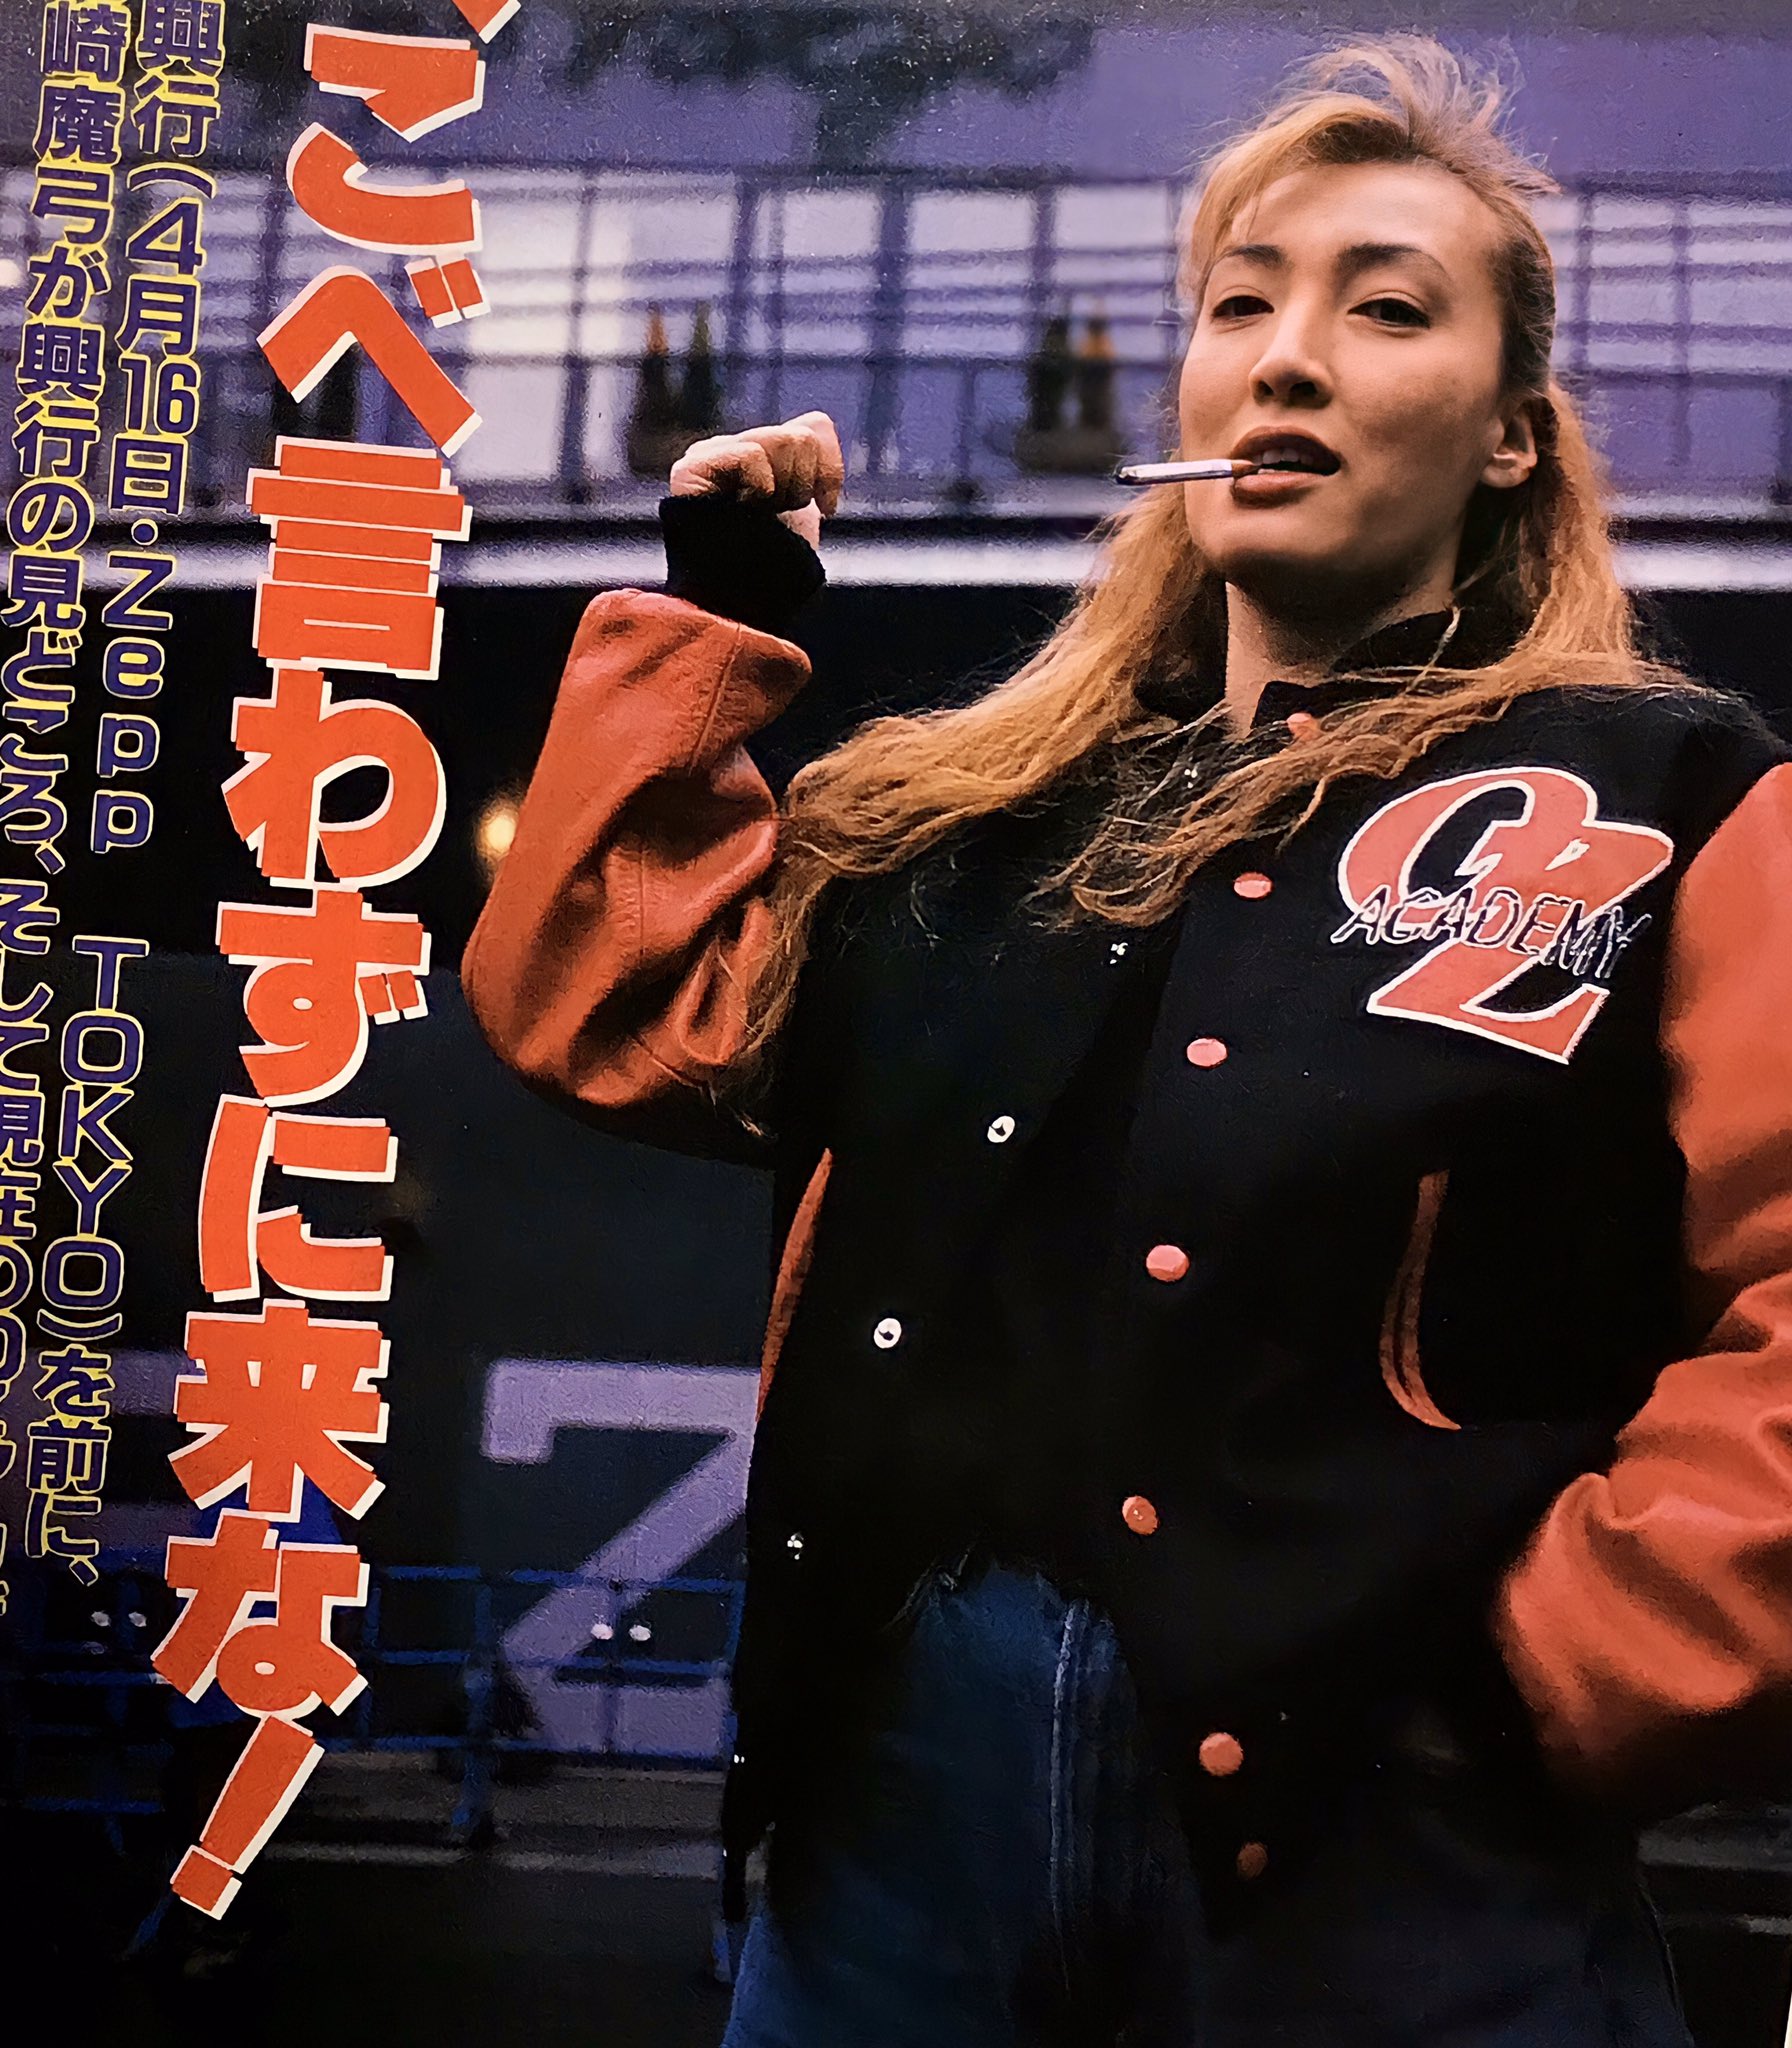 Vintage Puroresu プロレス on Twitter: "The incredible career of Mayumi Ozaki is both prolific, now spanning 5 separate decades (1986 - present), and awe-inspiring, having appeared in an otherworldly 4 WON *****